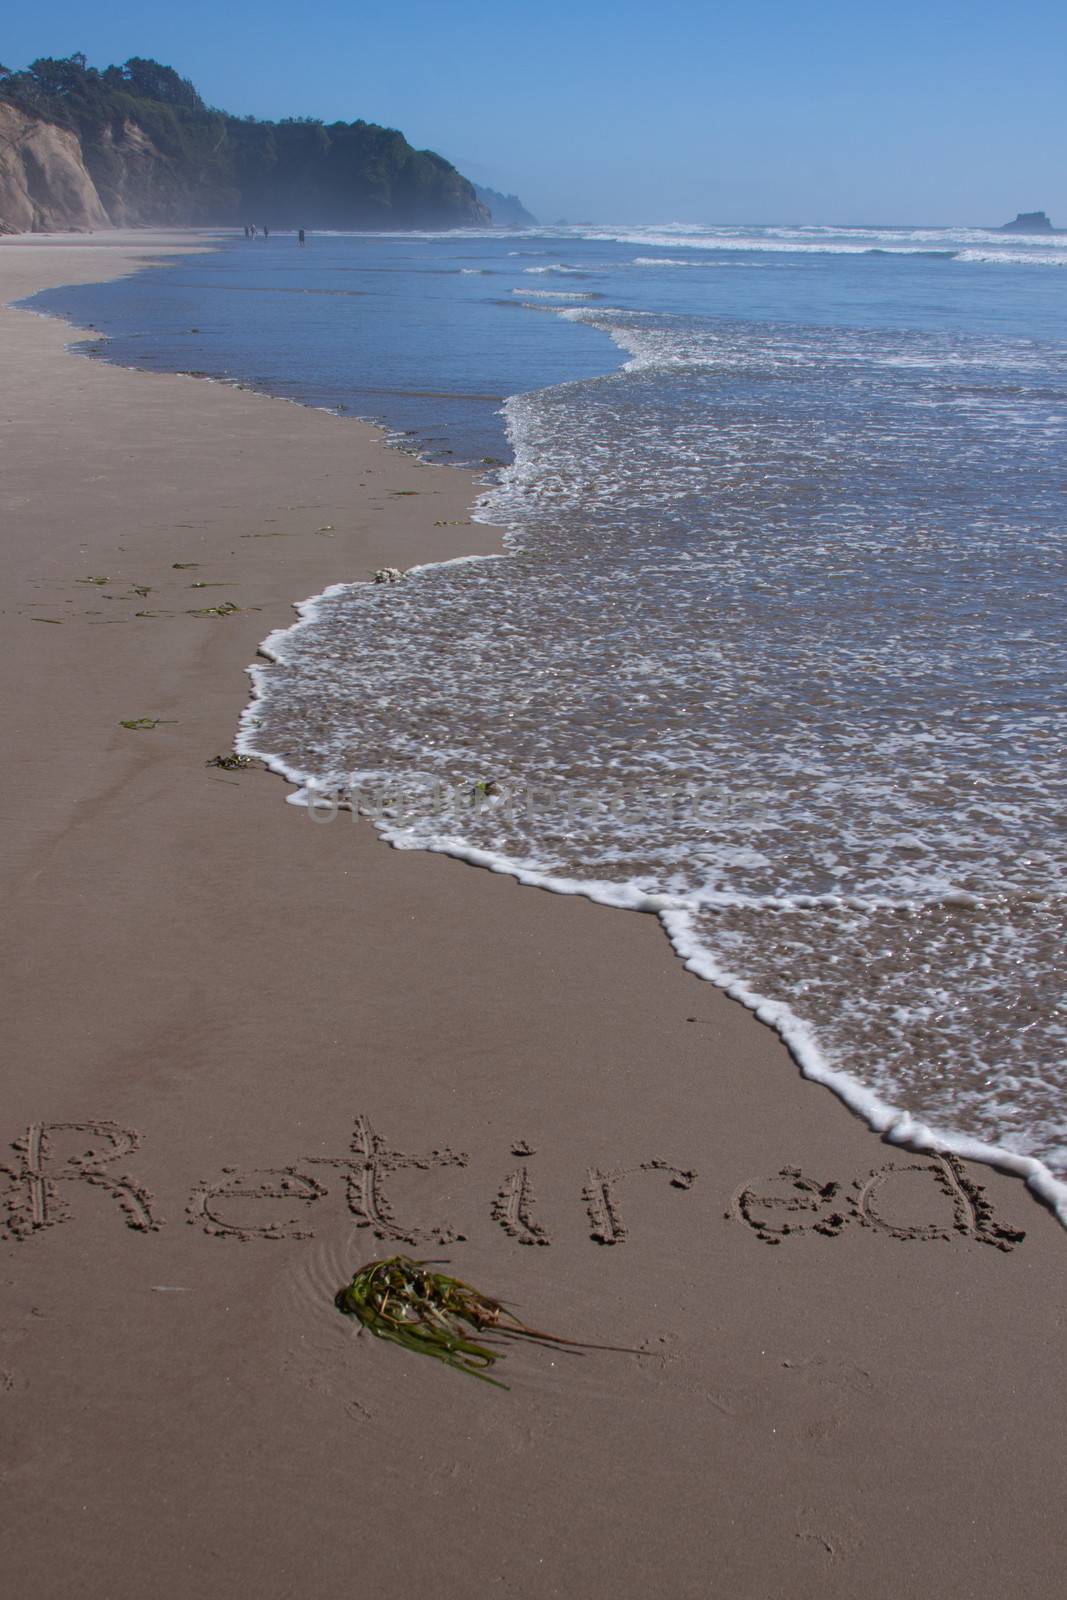 A beautiful image of a beach with the word "retired" written in the sand.